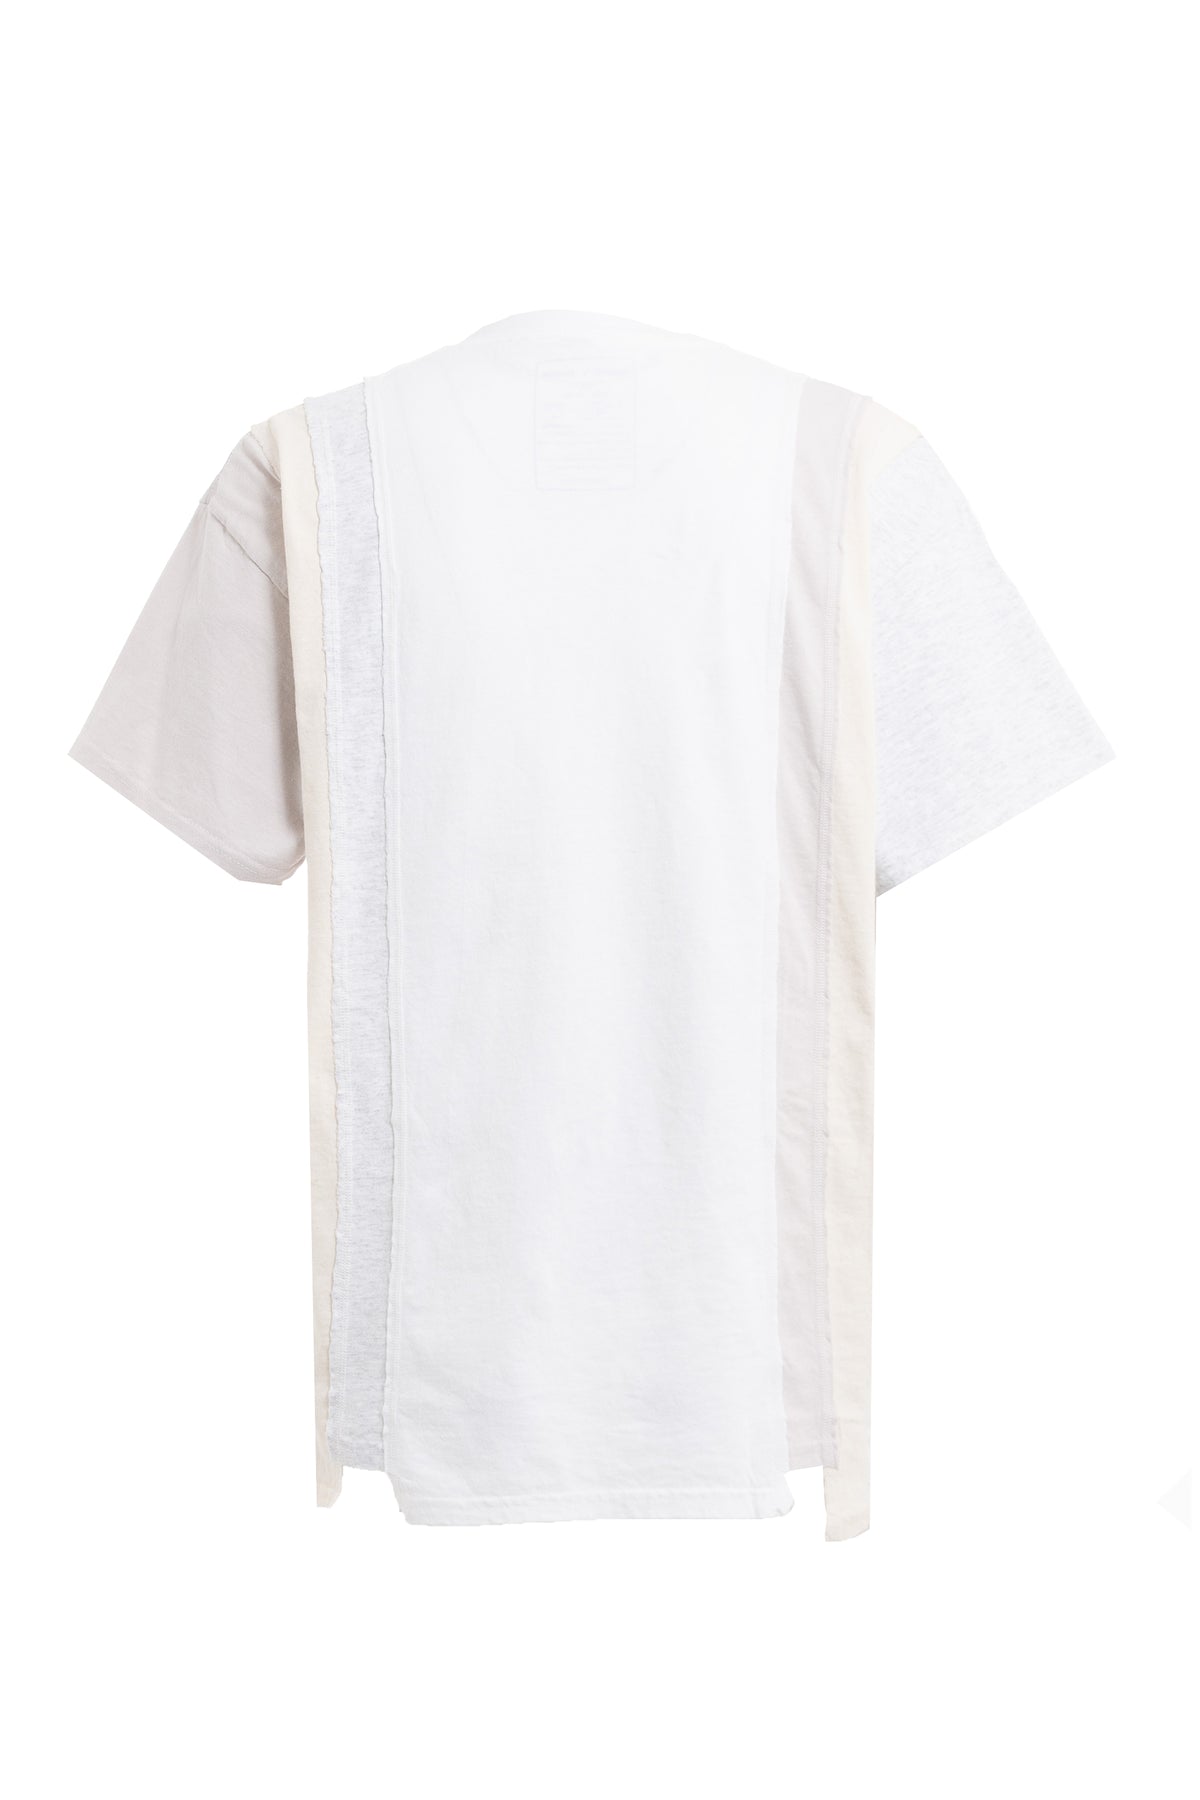 7 CUTS S/S TEE - SOLID / FADE / IVORY / XL